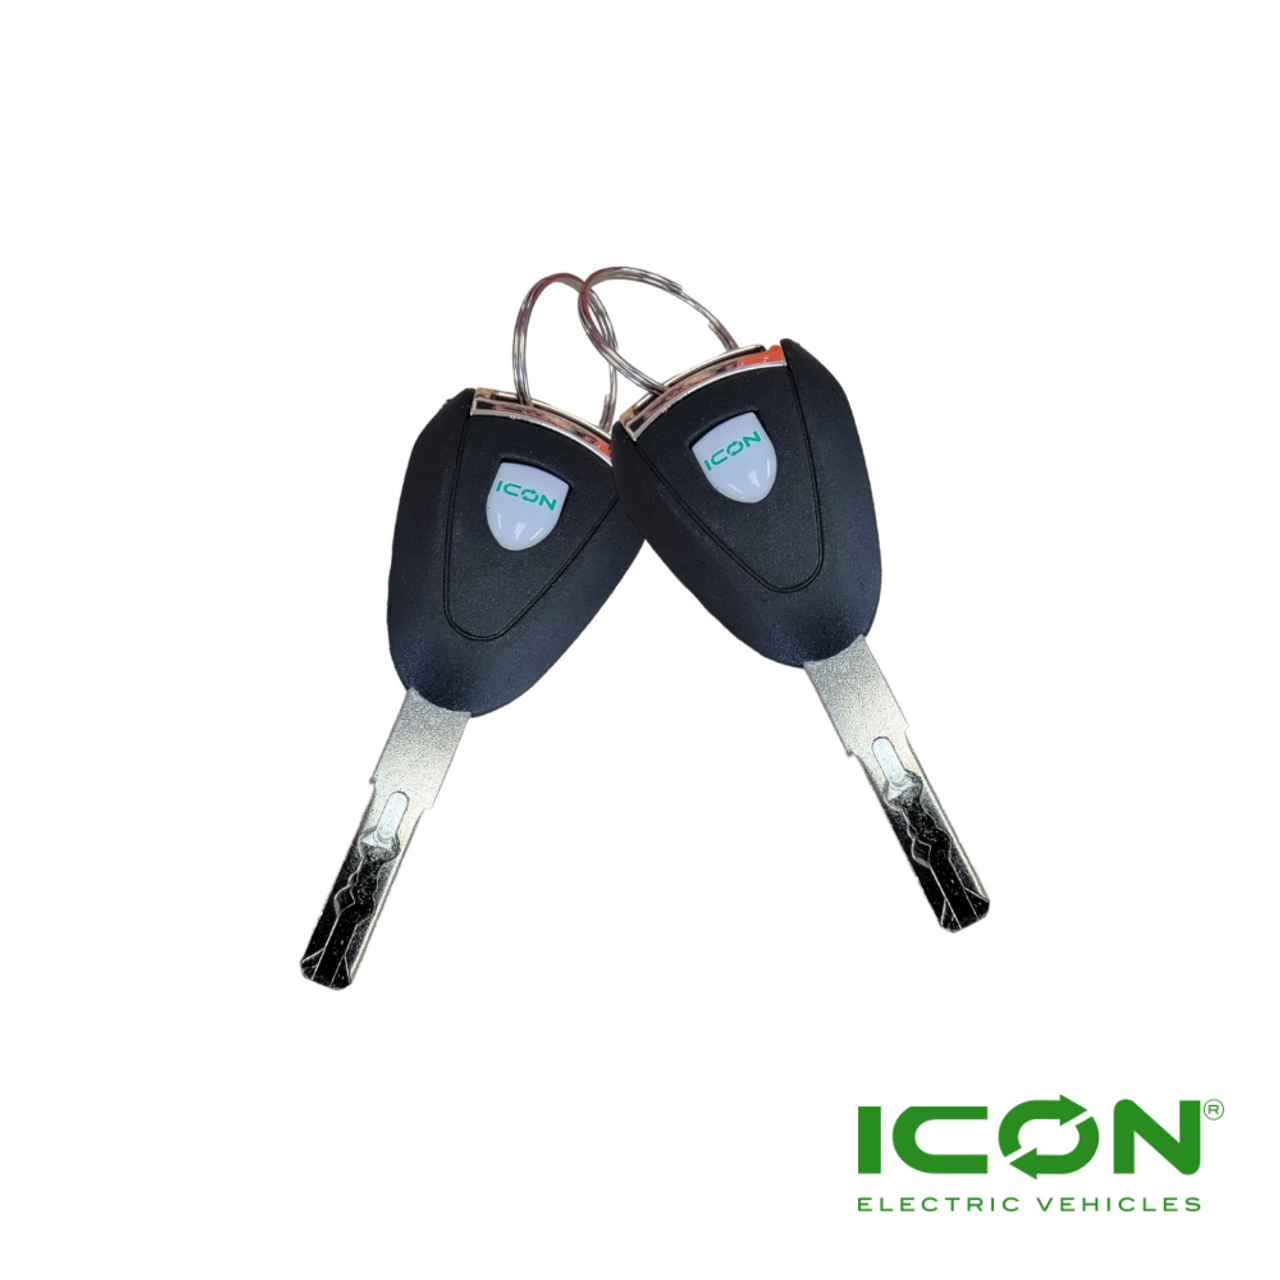 Replacement ICON Golf Cart Keyed Different (UNIQUE) Ignition Switch, EG-702-IC, 3.03.002.000102, 3.202.02.020049